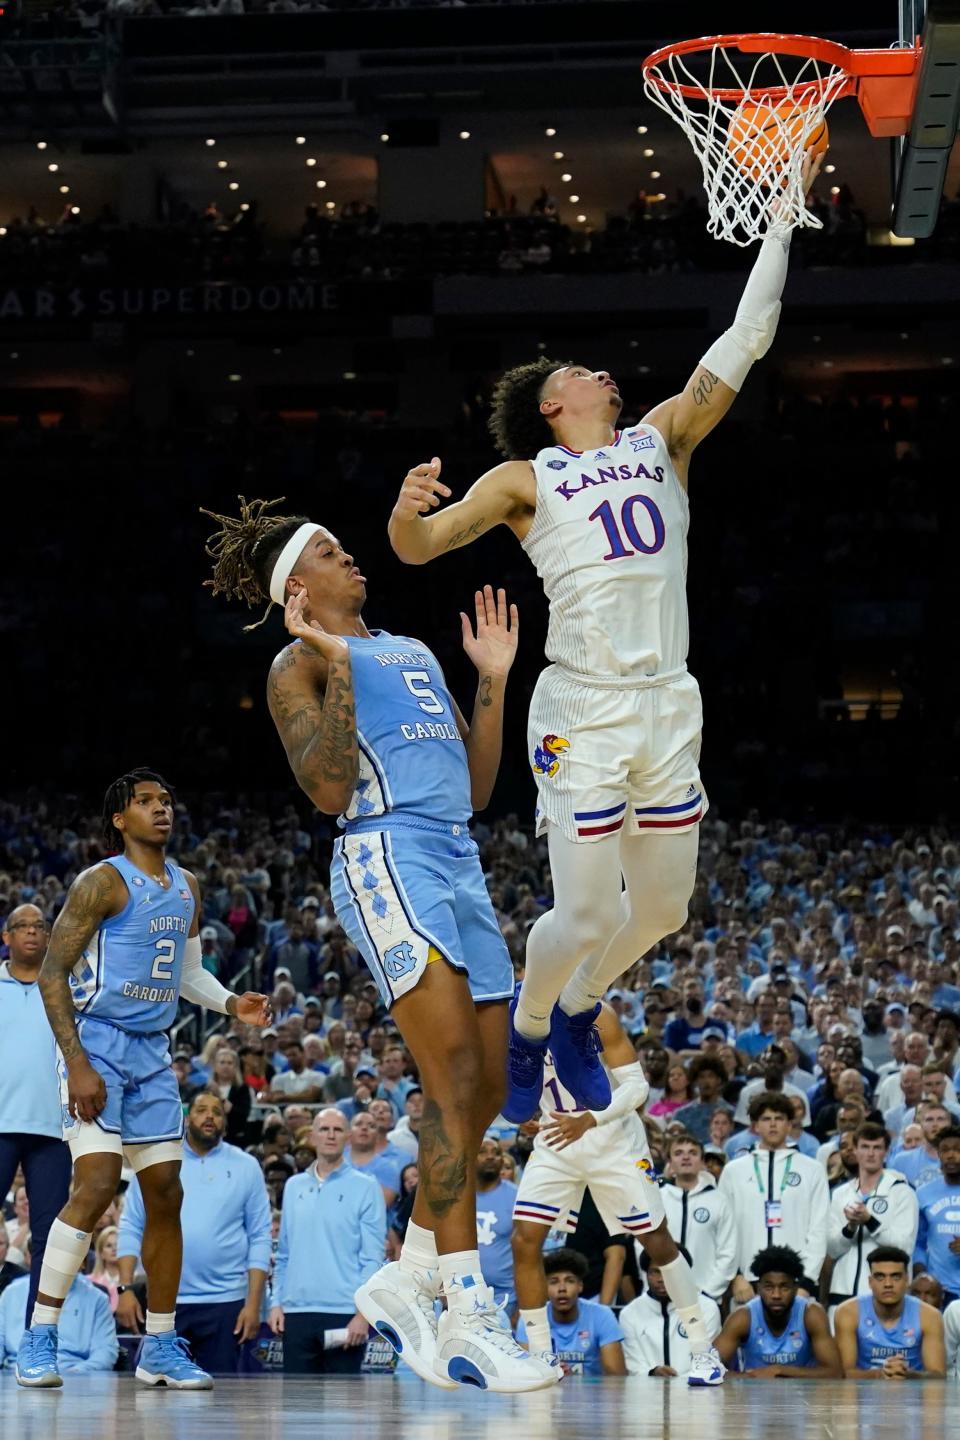 Kansas forward Jalen Wilson shoots over North Carolina forward Armando Bacot during the first half of the championship game of the NCAA tournament on April 4, 2022, in New Orleans.